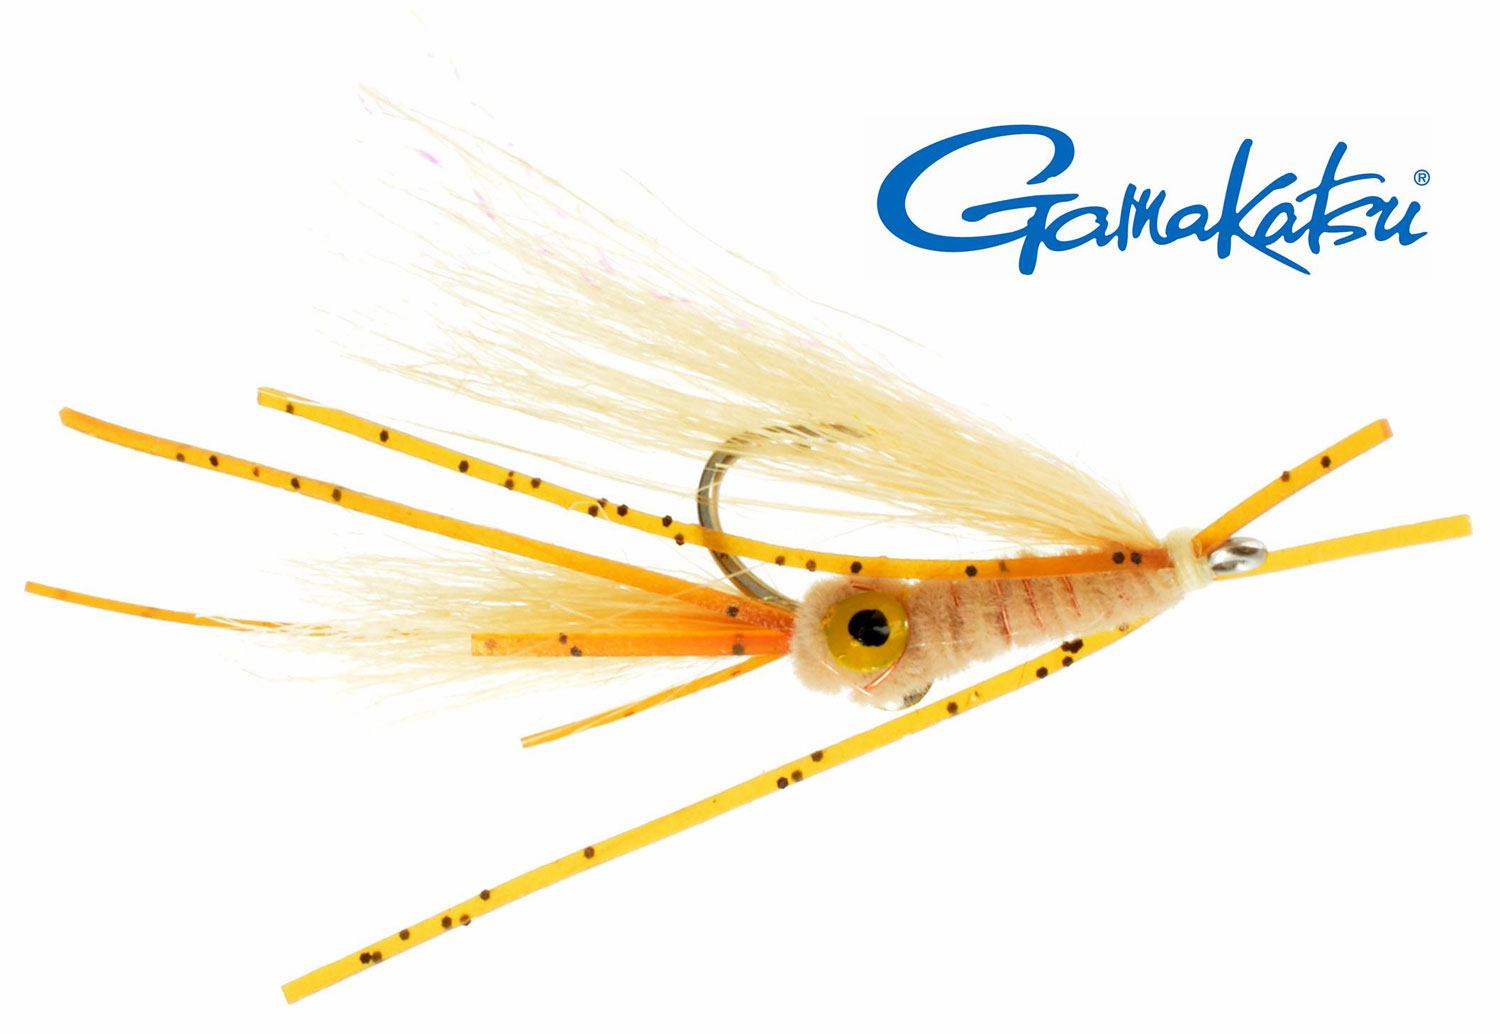 6 Tan squimp Saltwater Fly Fishing Fly 